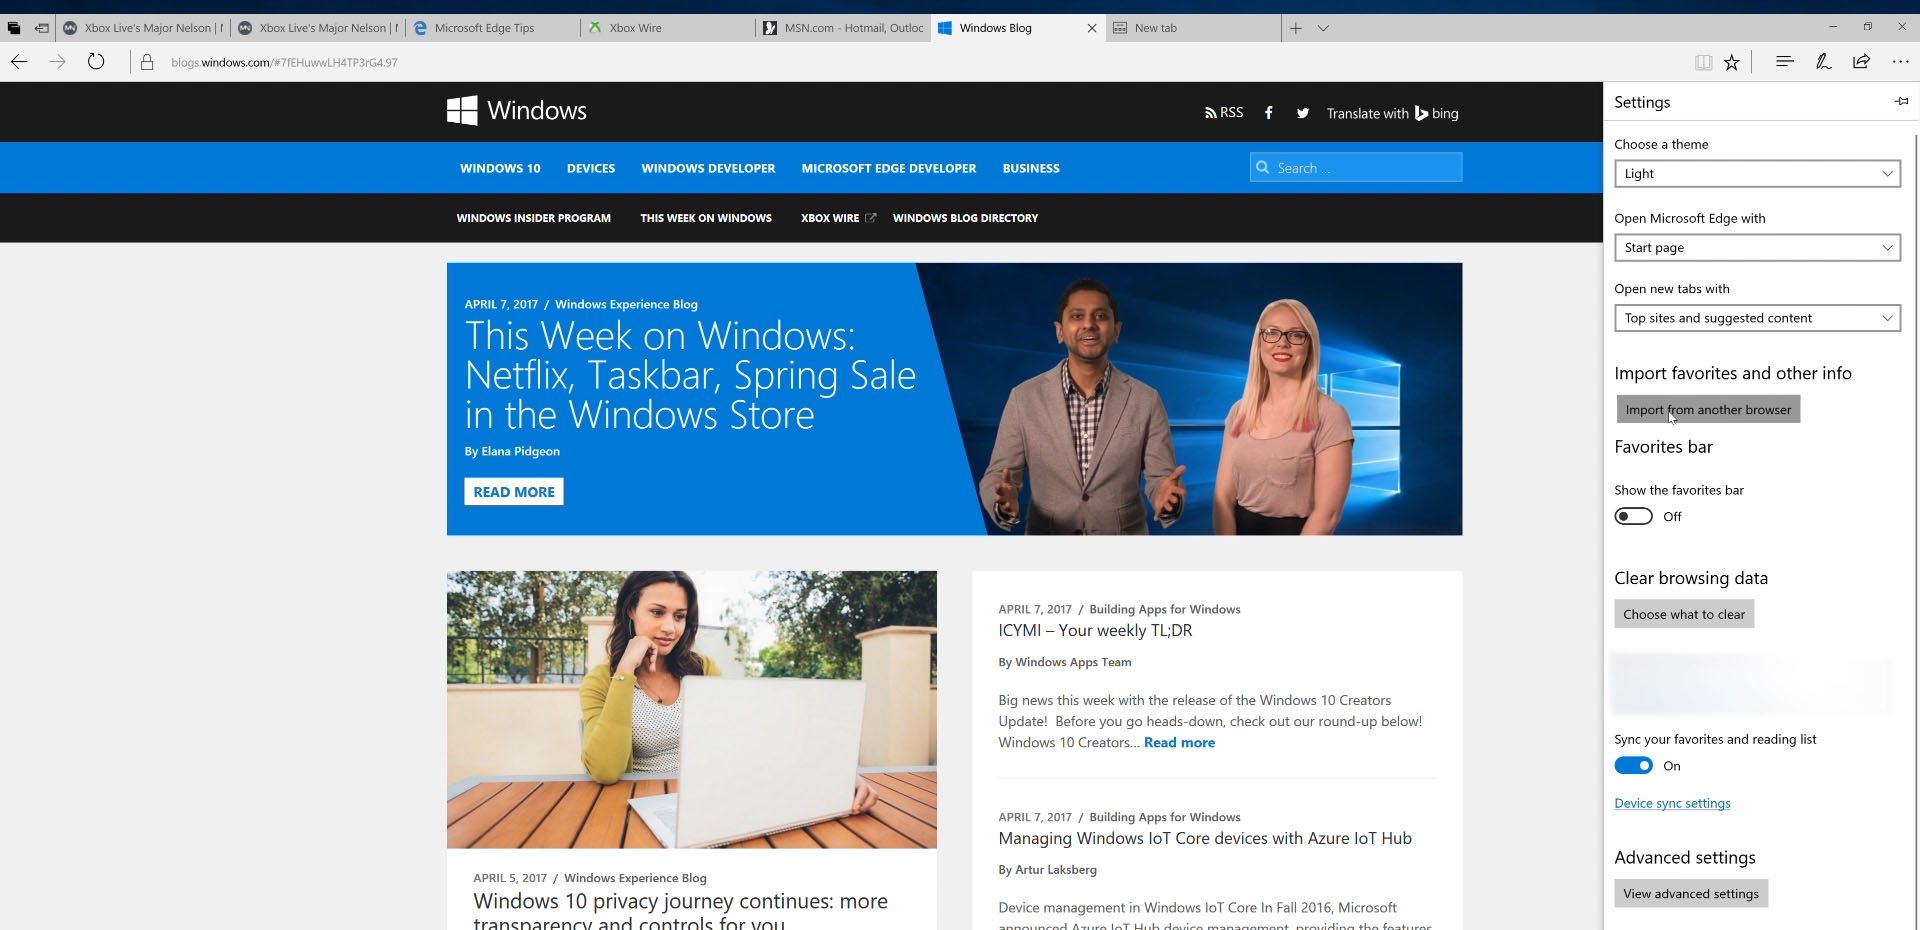 Importing favorites from another browser with Microsoft Edge as shown on the homepage of the Windows Blog.